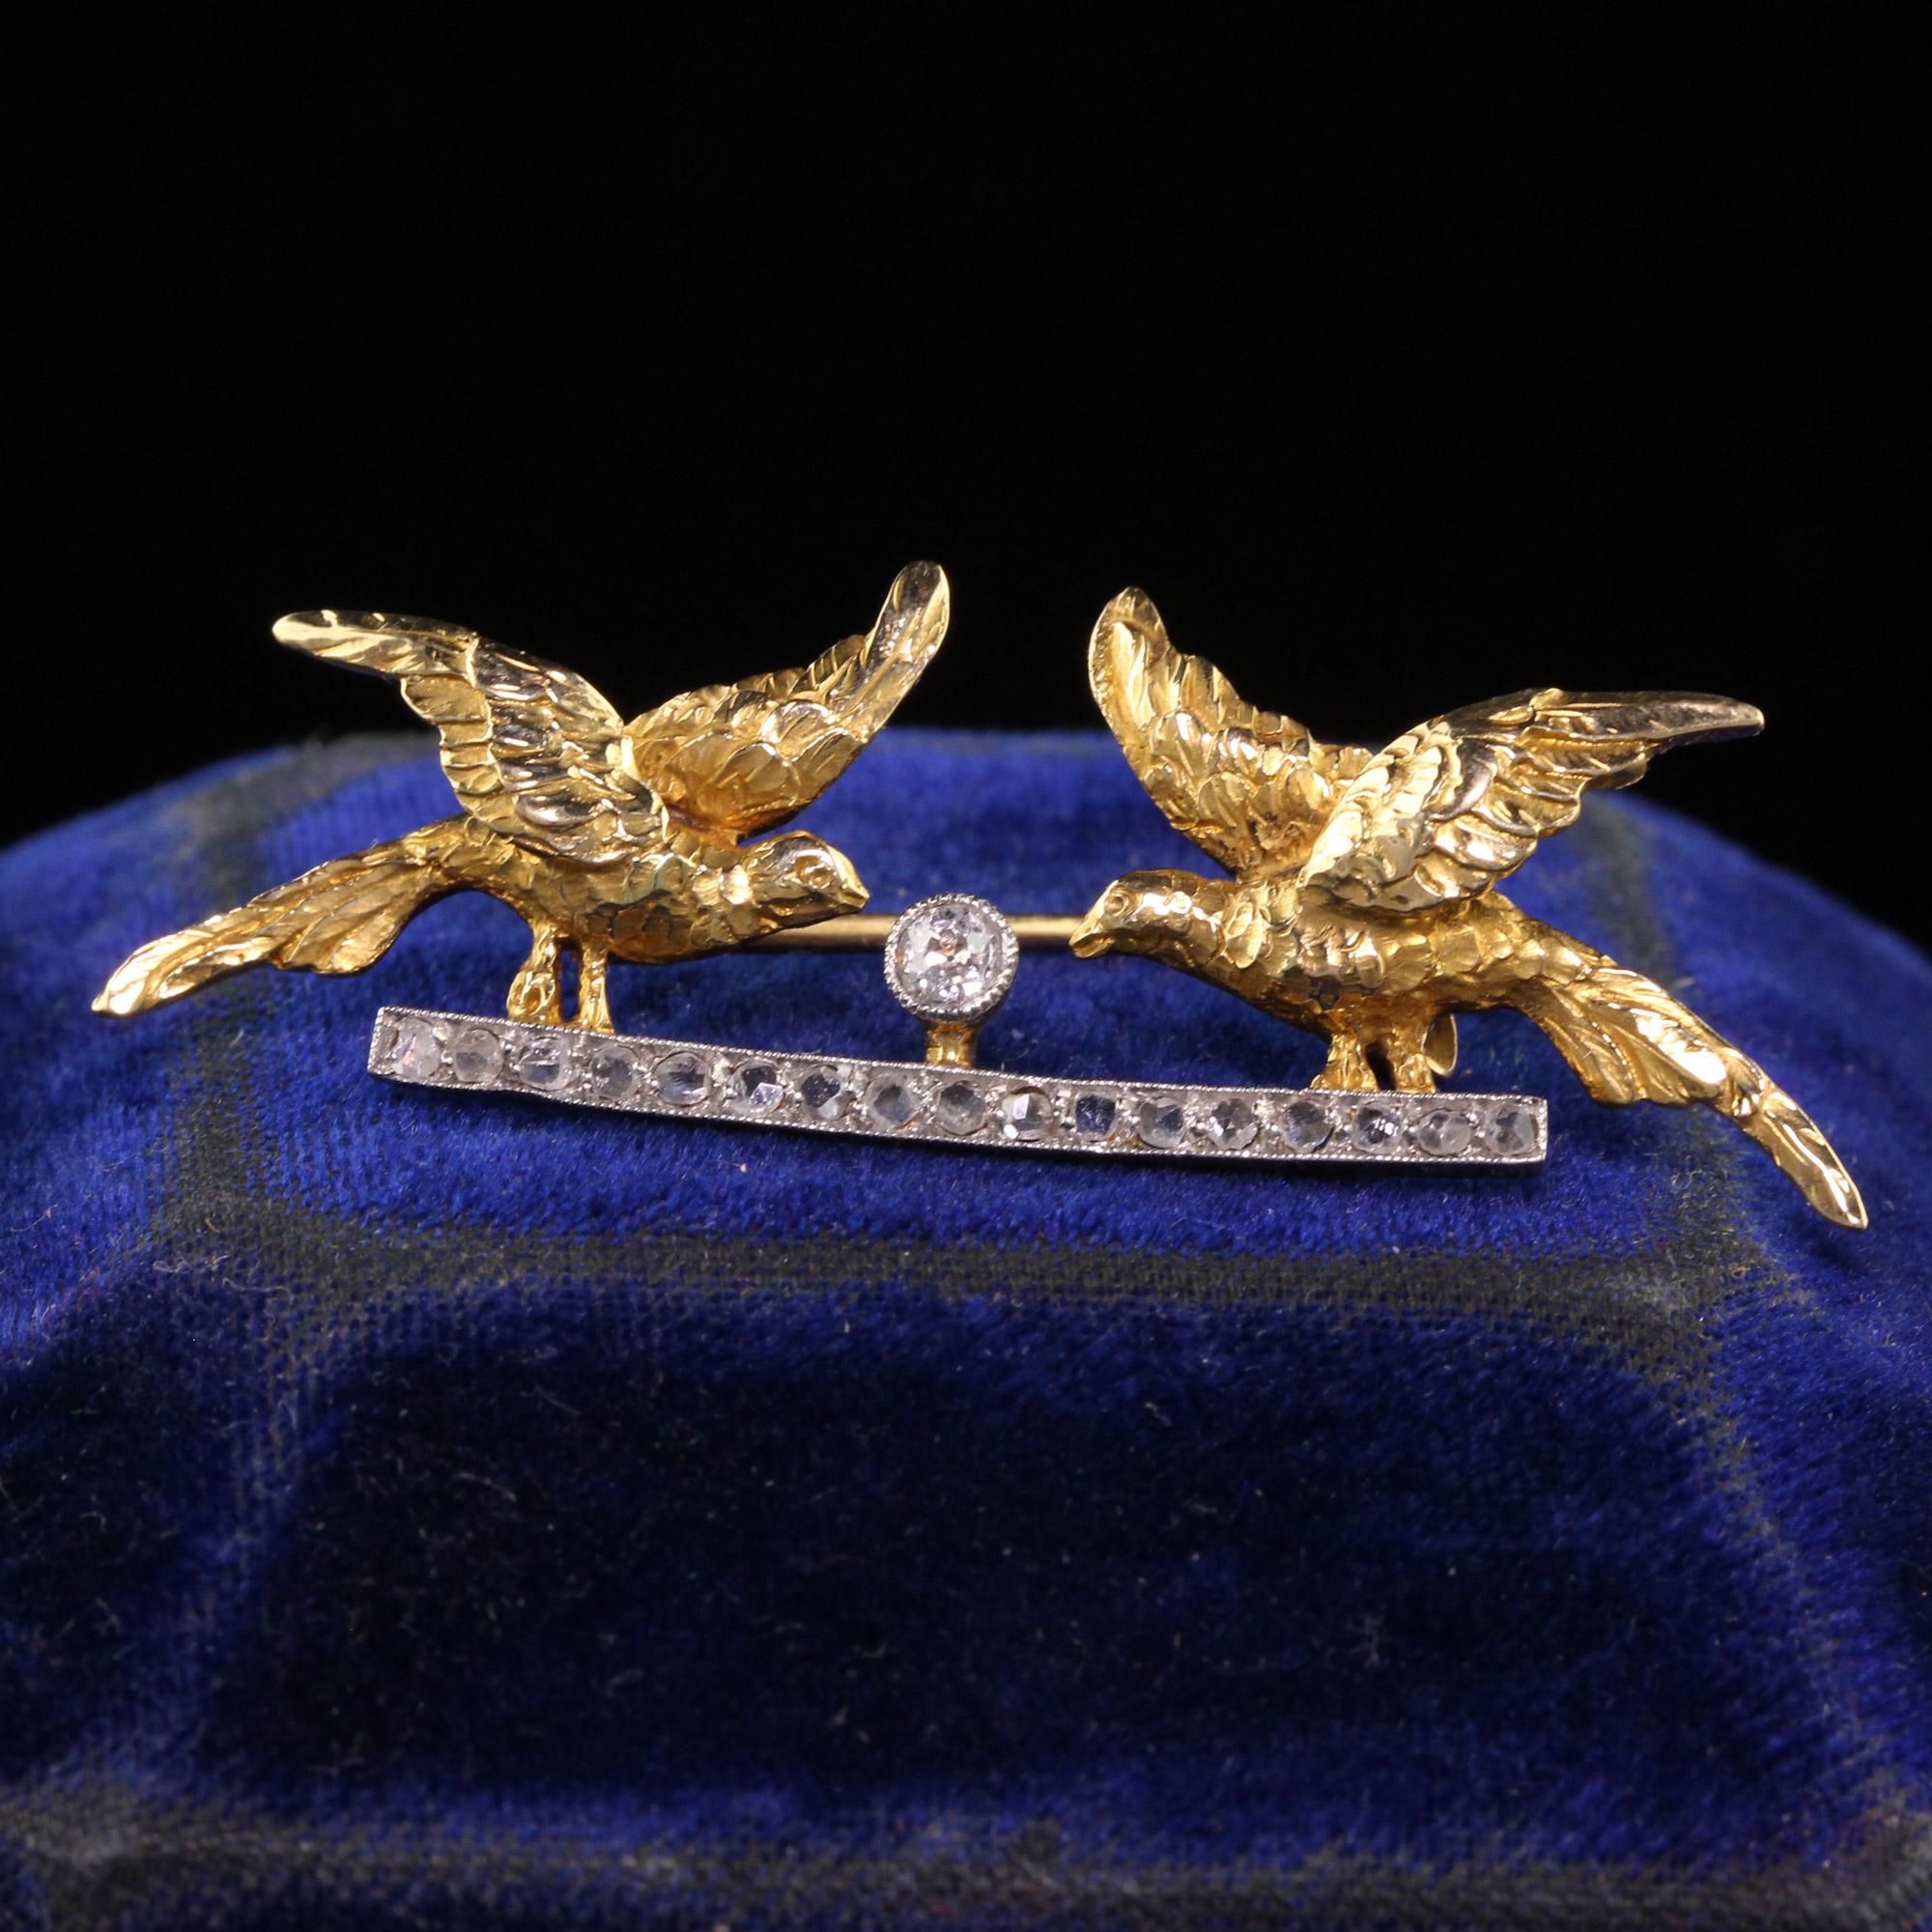 Beautiful Antique Edwardian 18K Yellow Gold Platinum Top Rose Cut Double Bird Pin. This beautiful pin is crafted in 18k yellow gold and platinum top. The pin features rose cut and an old european cut diamond in the center. It shows a beautiful scene